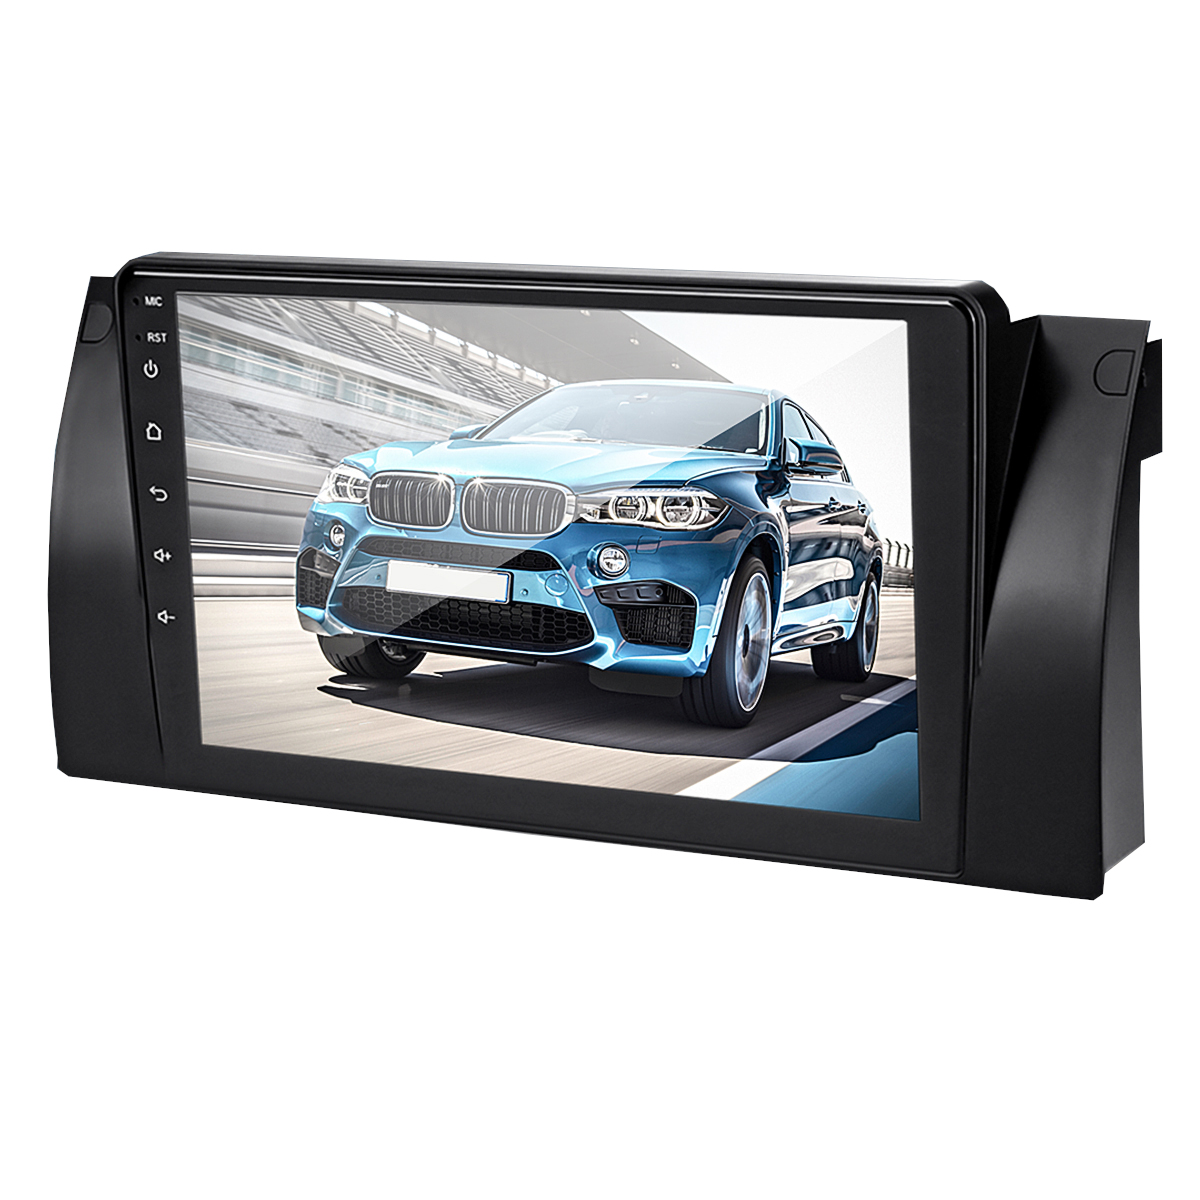 

9 Inch Android 8.1 Car Stereo Radio MP5 Player Dash Video Quad Core 1+16GB Wifi GPS Built-in Microphone For BMW E38 E39 E53 X5